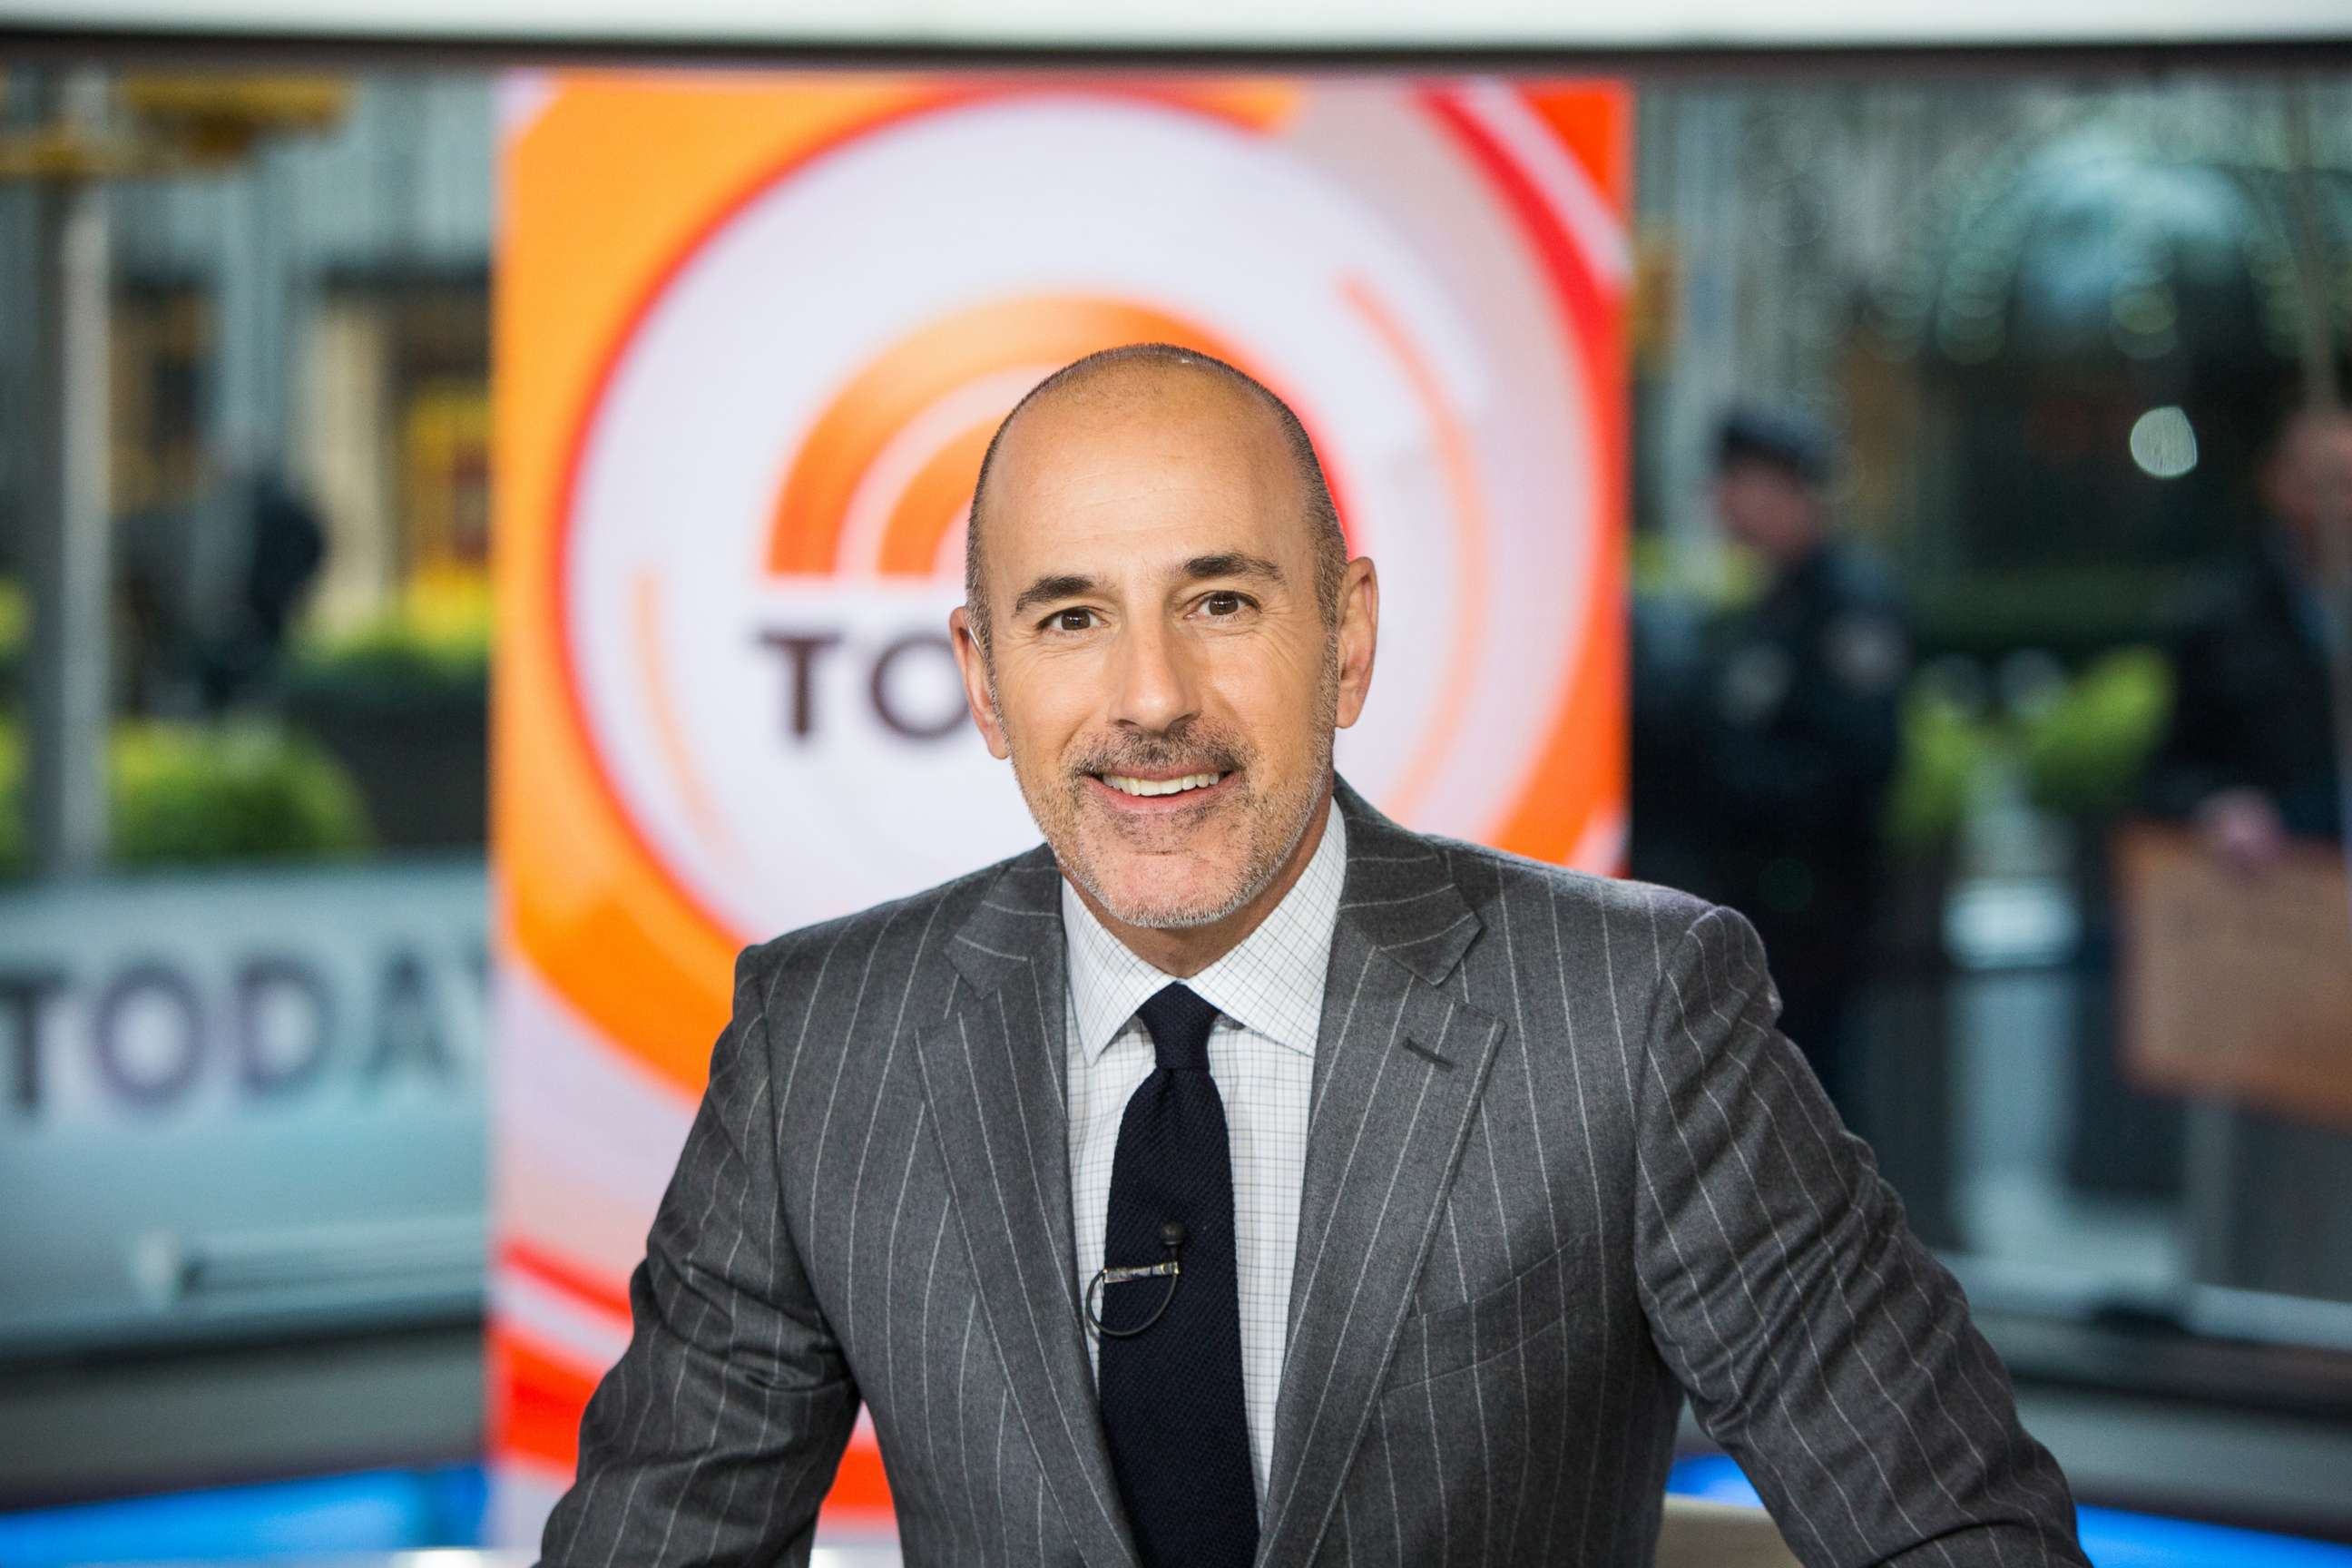 PHOTO: Matt Lauer on the "Today" show in this Nov. 8, 2017 file photo.